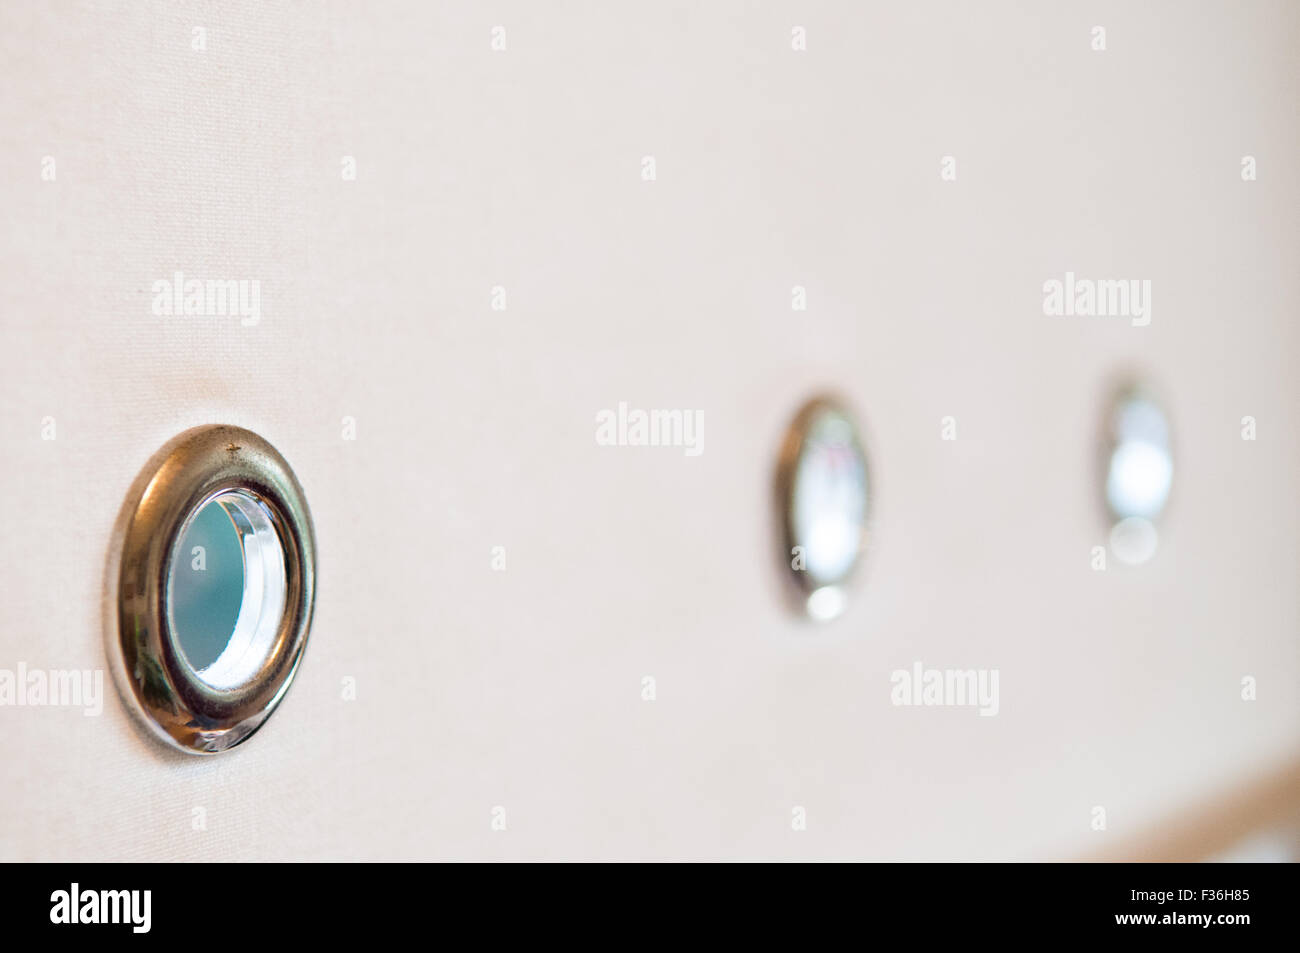 Plain coloured material background with three rings at the base Stock Photo